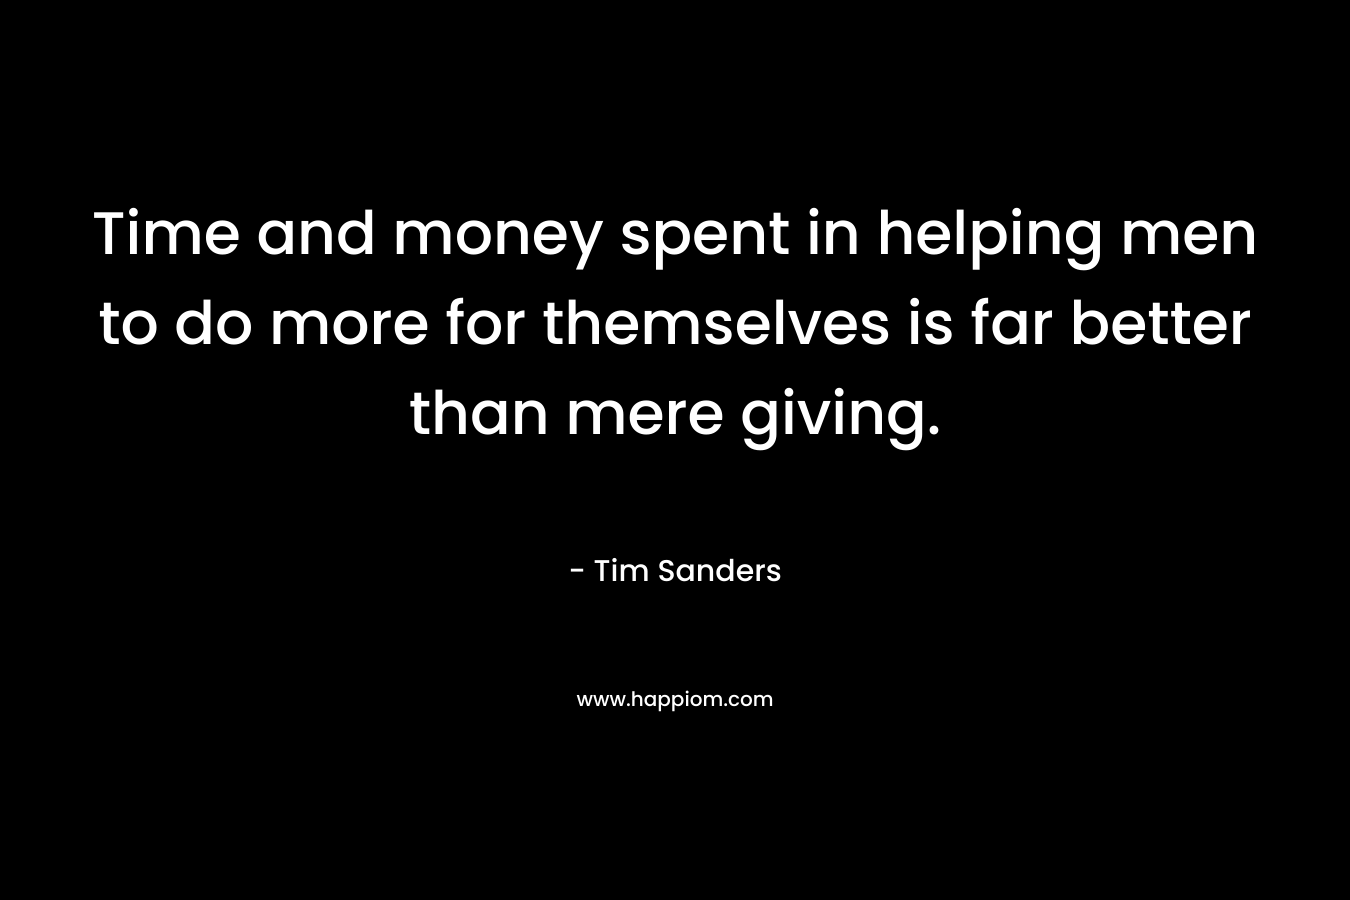 Time and money spent in helping men to do more for themselves is far better than mere giving. – Tim Sanders